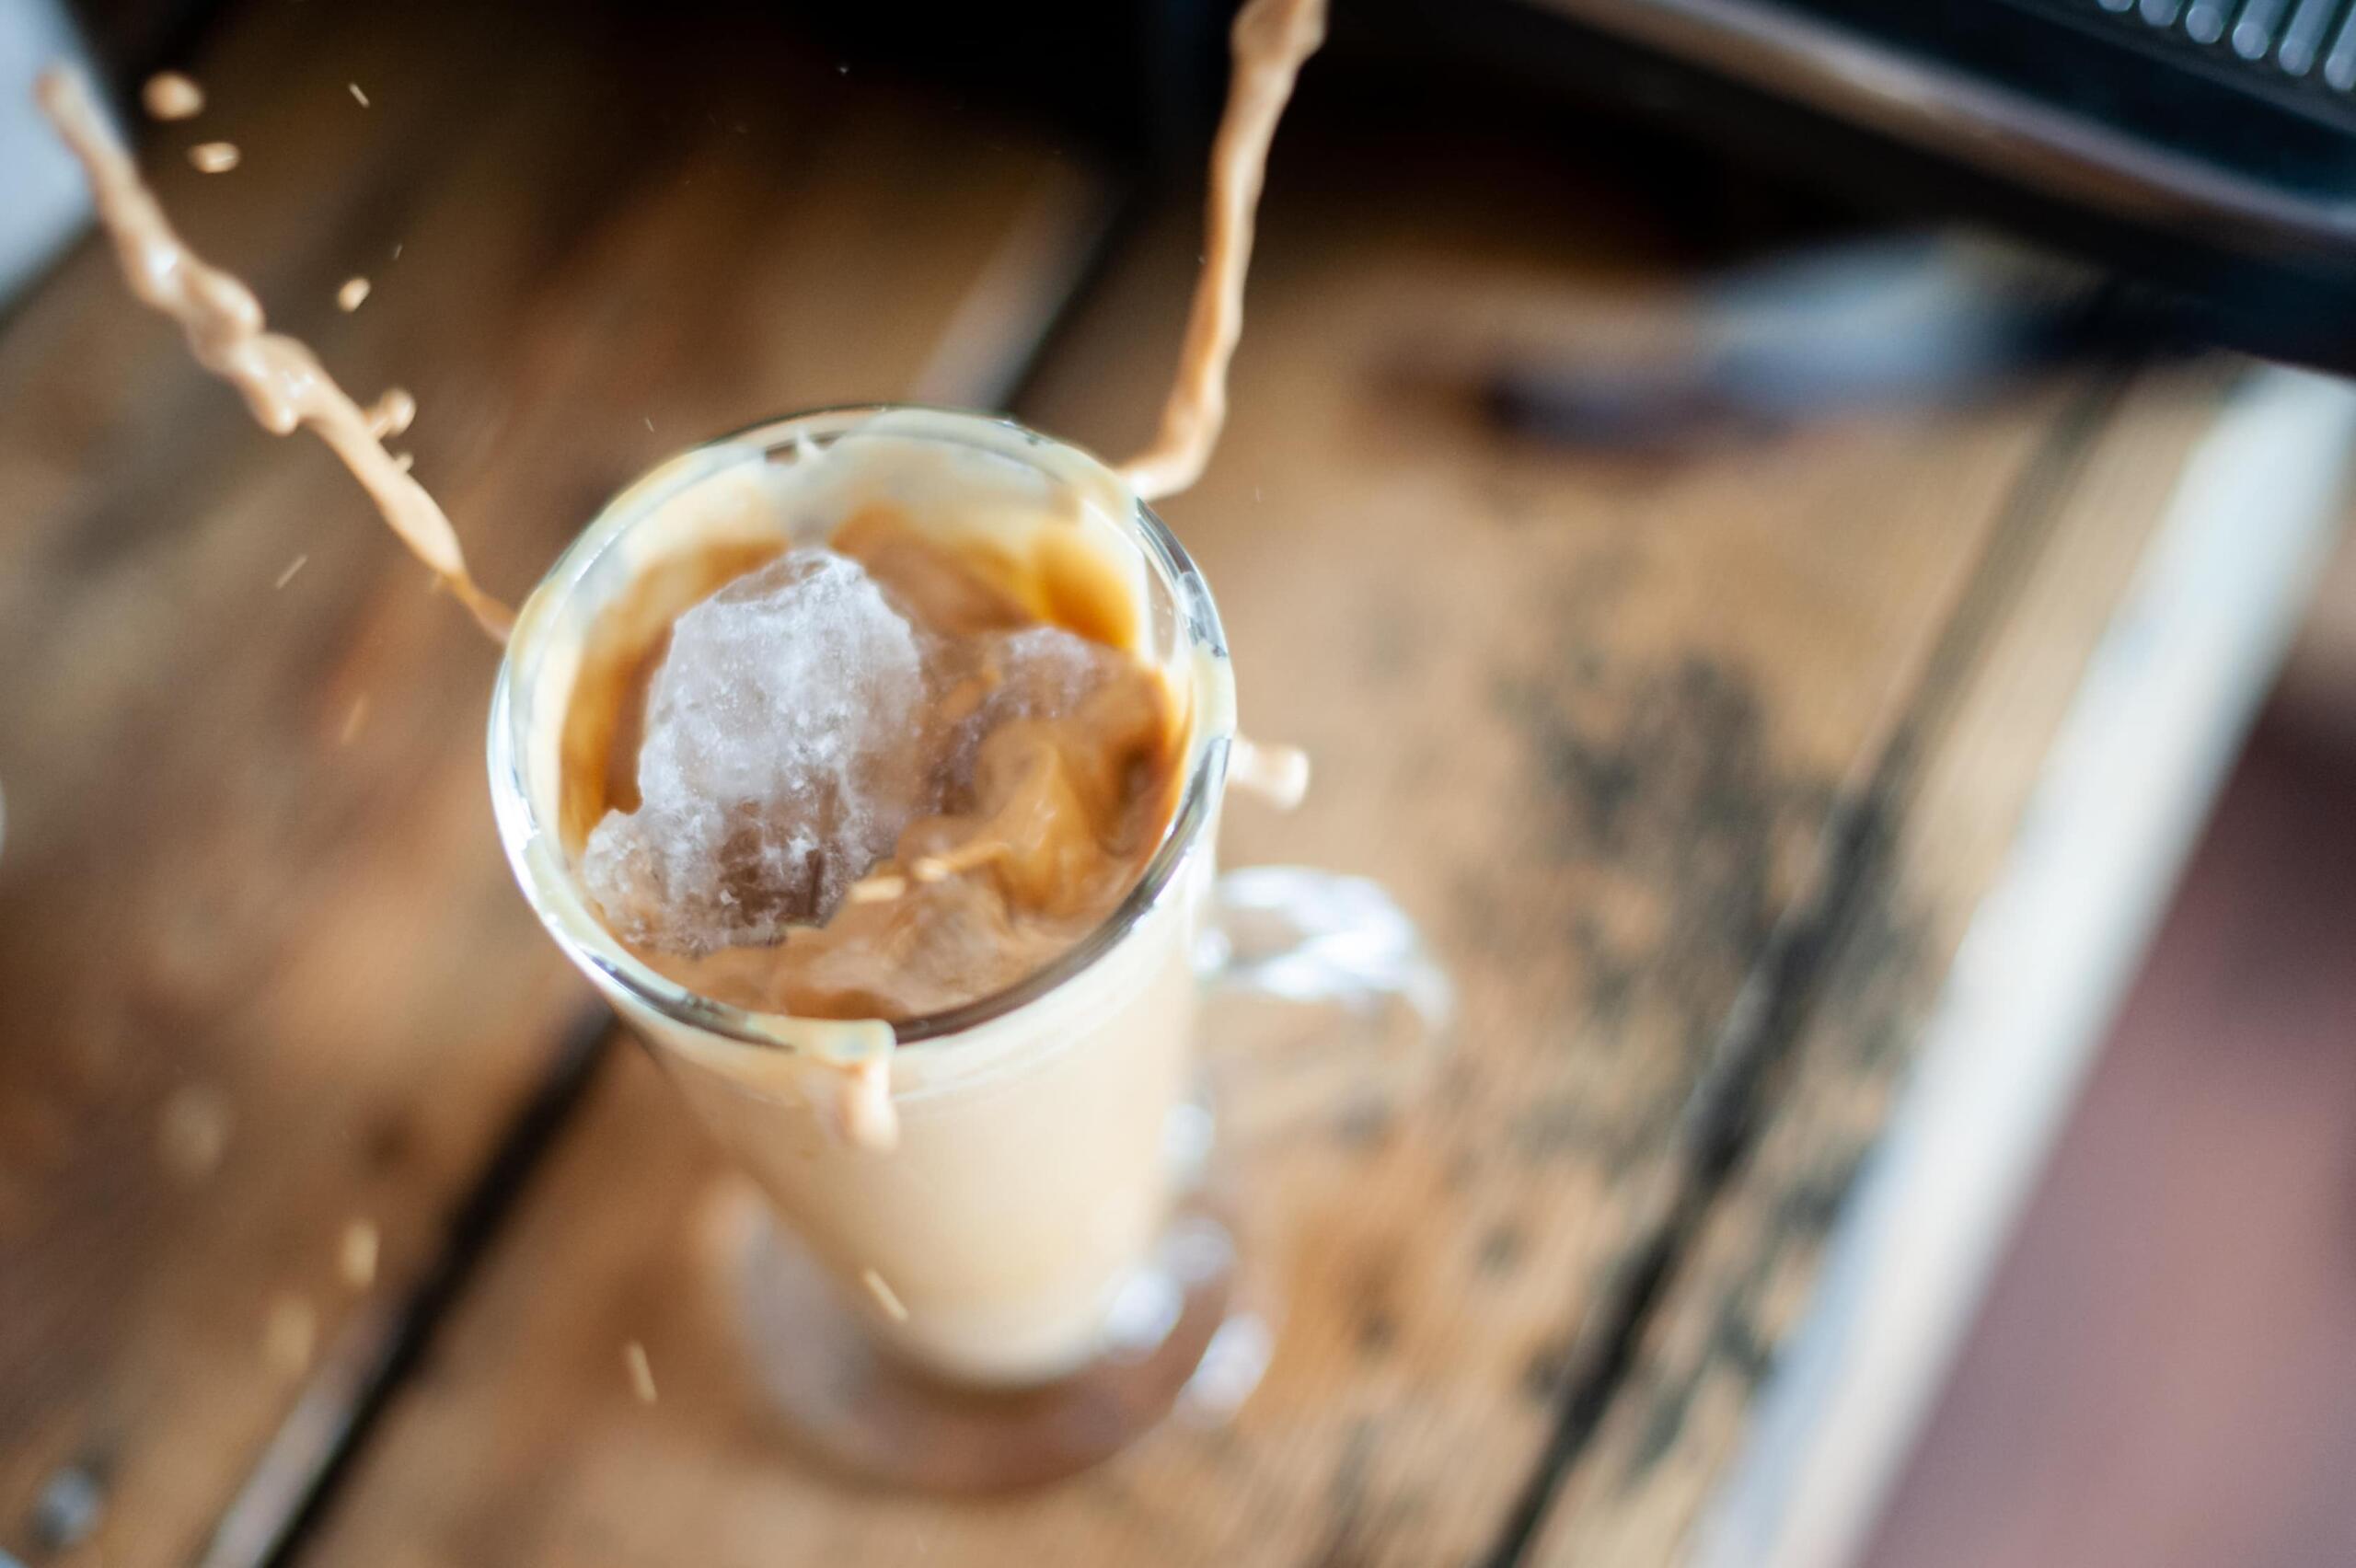 Ice splashing into a glass of cold coffee